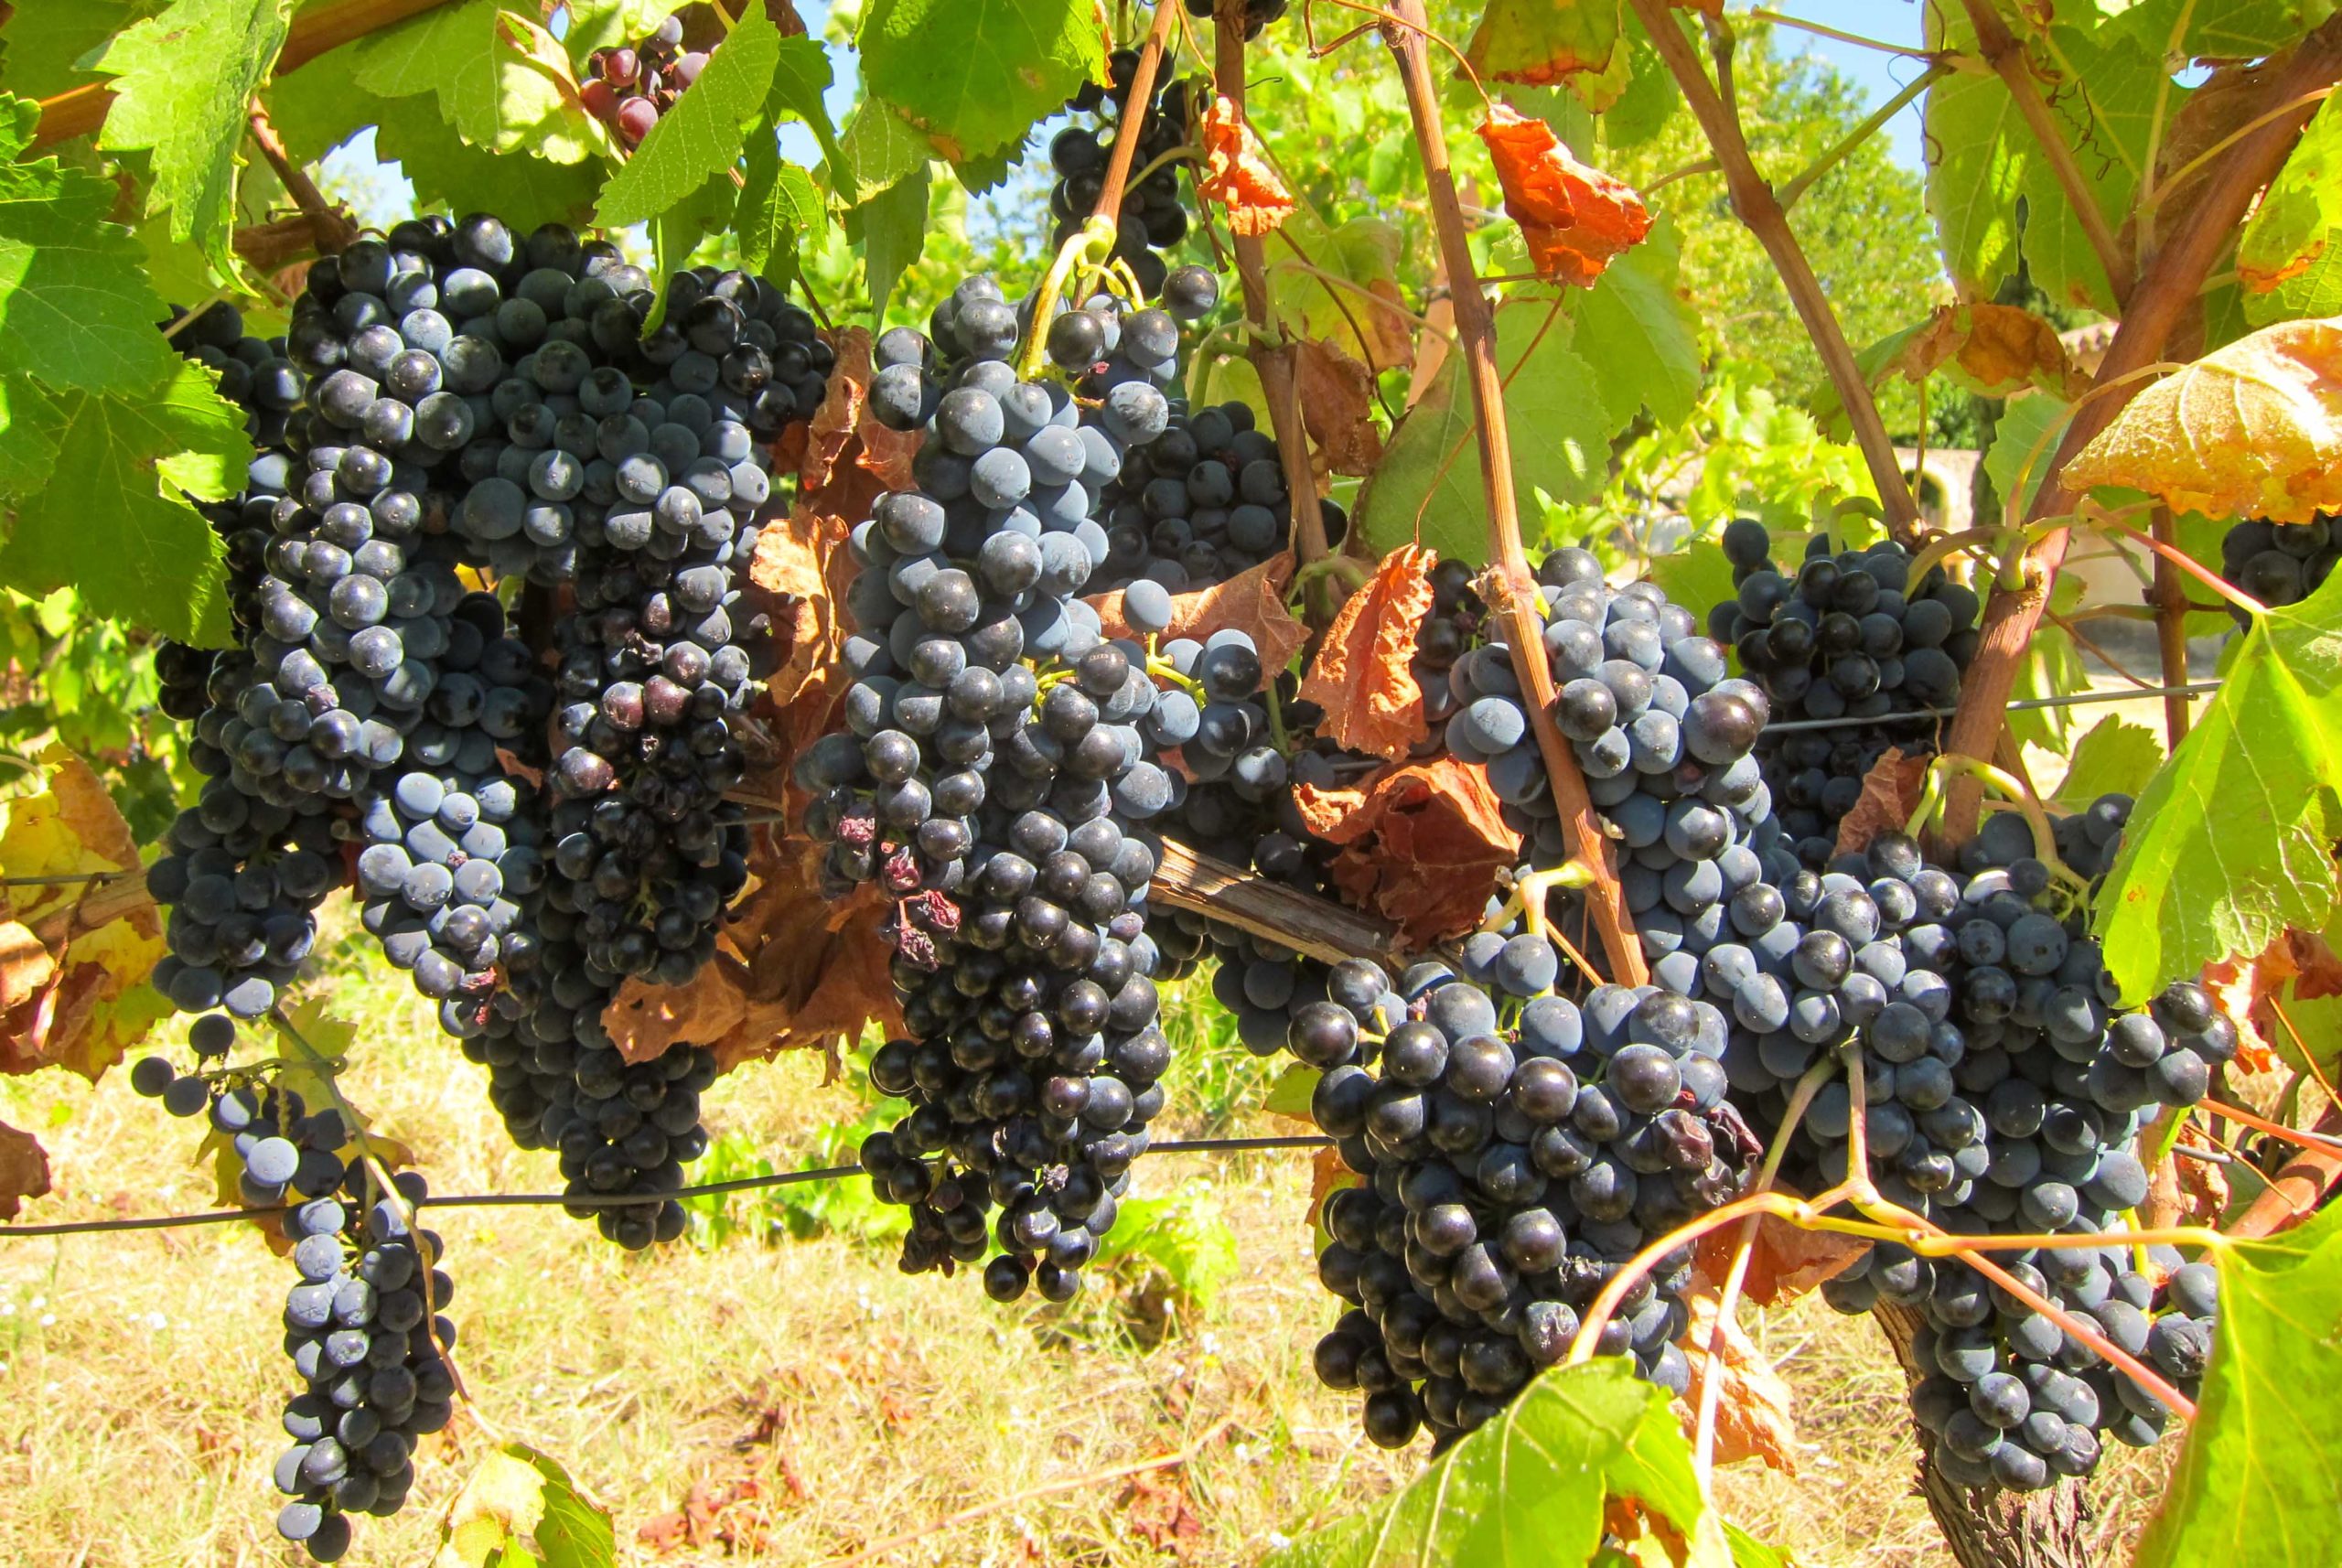 Bonnieux Grapes © Art Anderson - licence [CC BY 2.0] from Wikimedia Commons